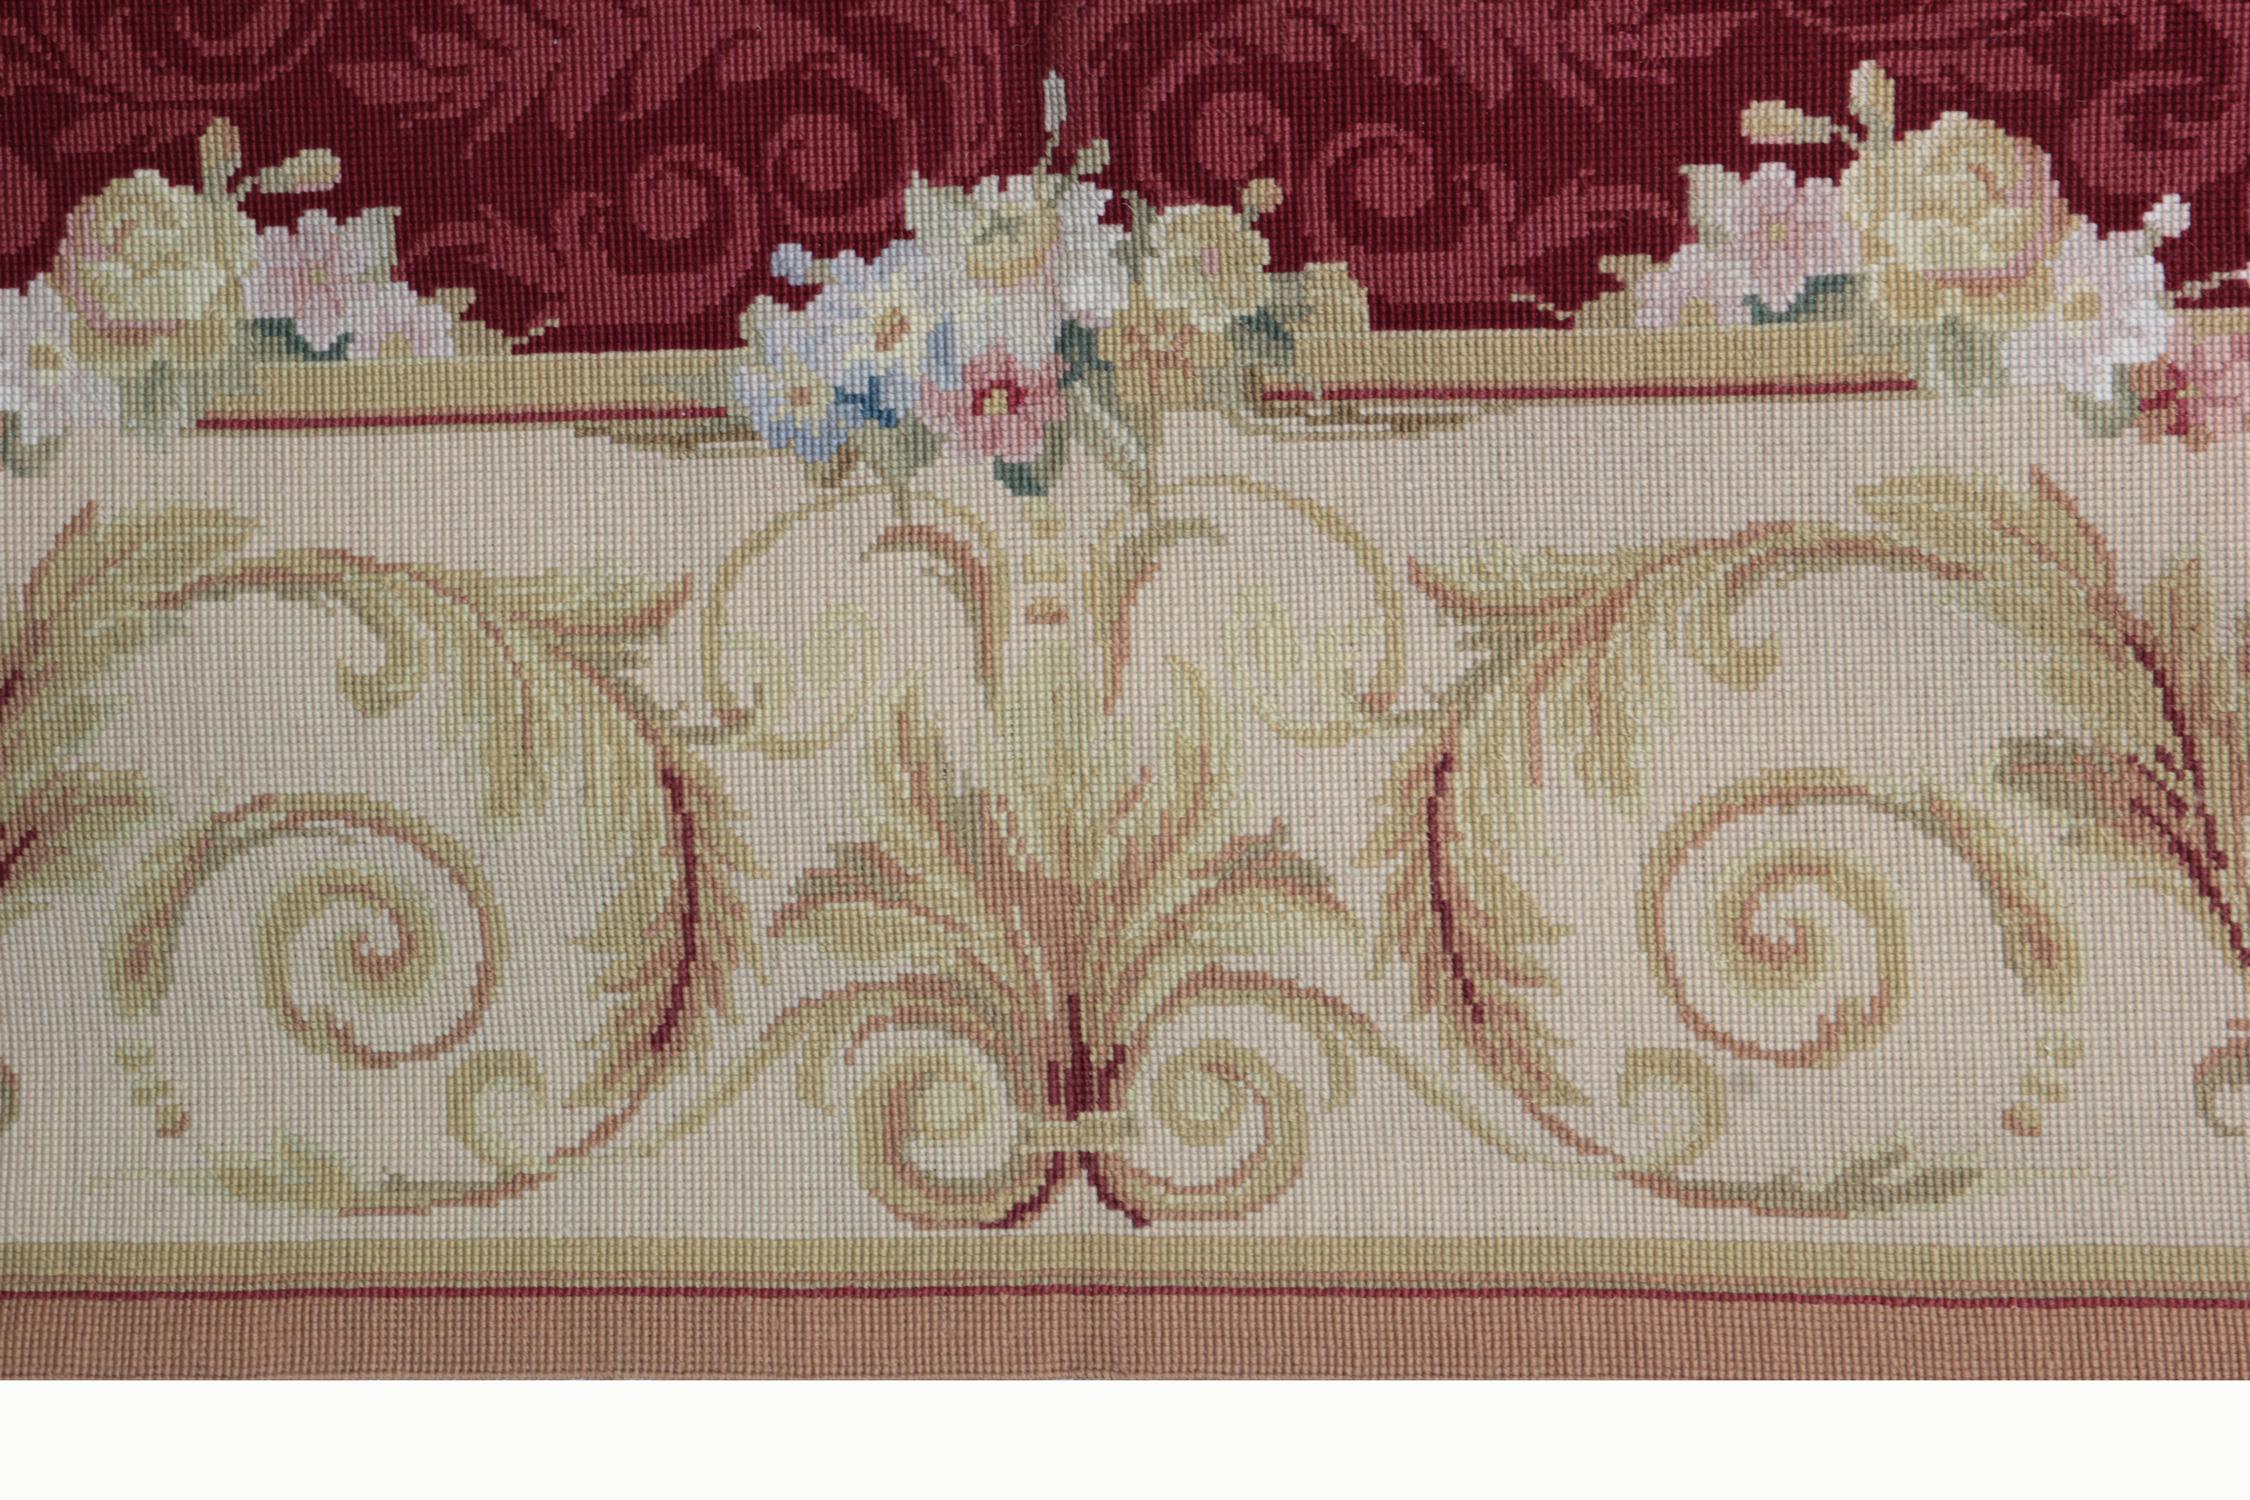 Baroque Vintage Aubusson Style Needlepoint Rug, Handmade Carpet Tapestry Wall Hanging